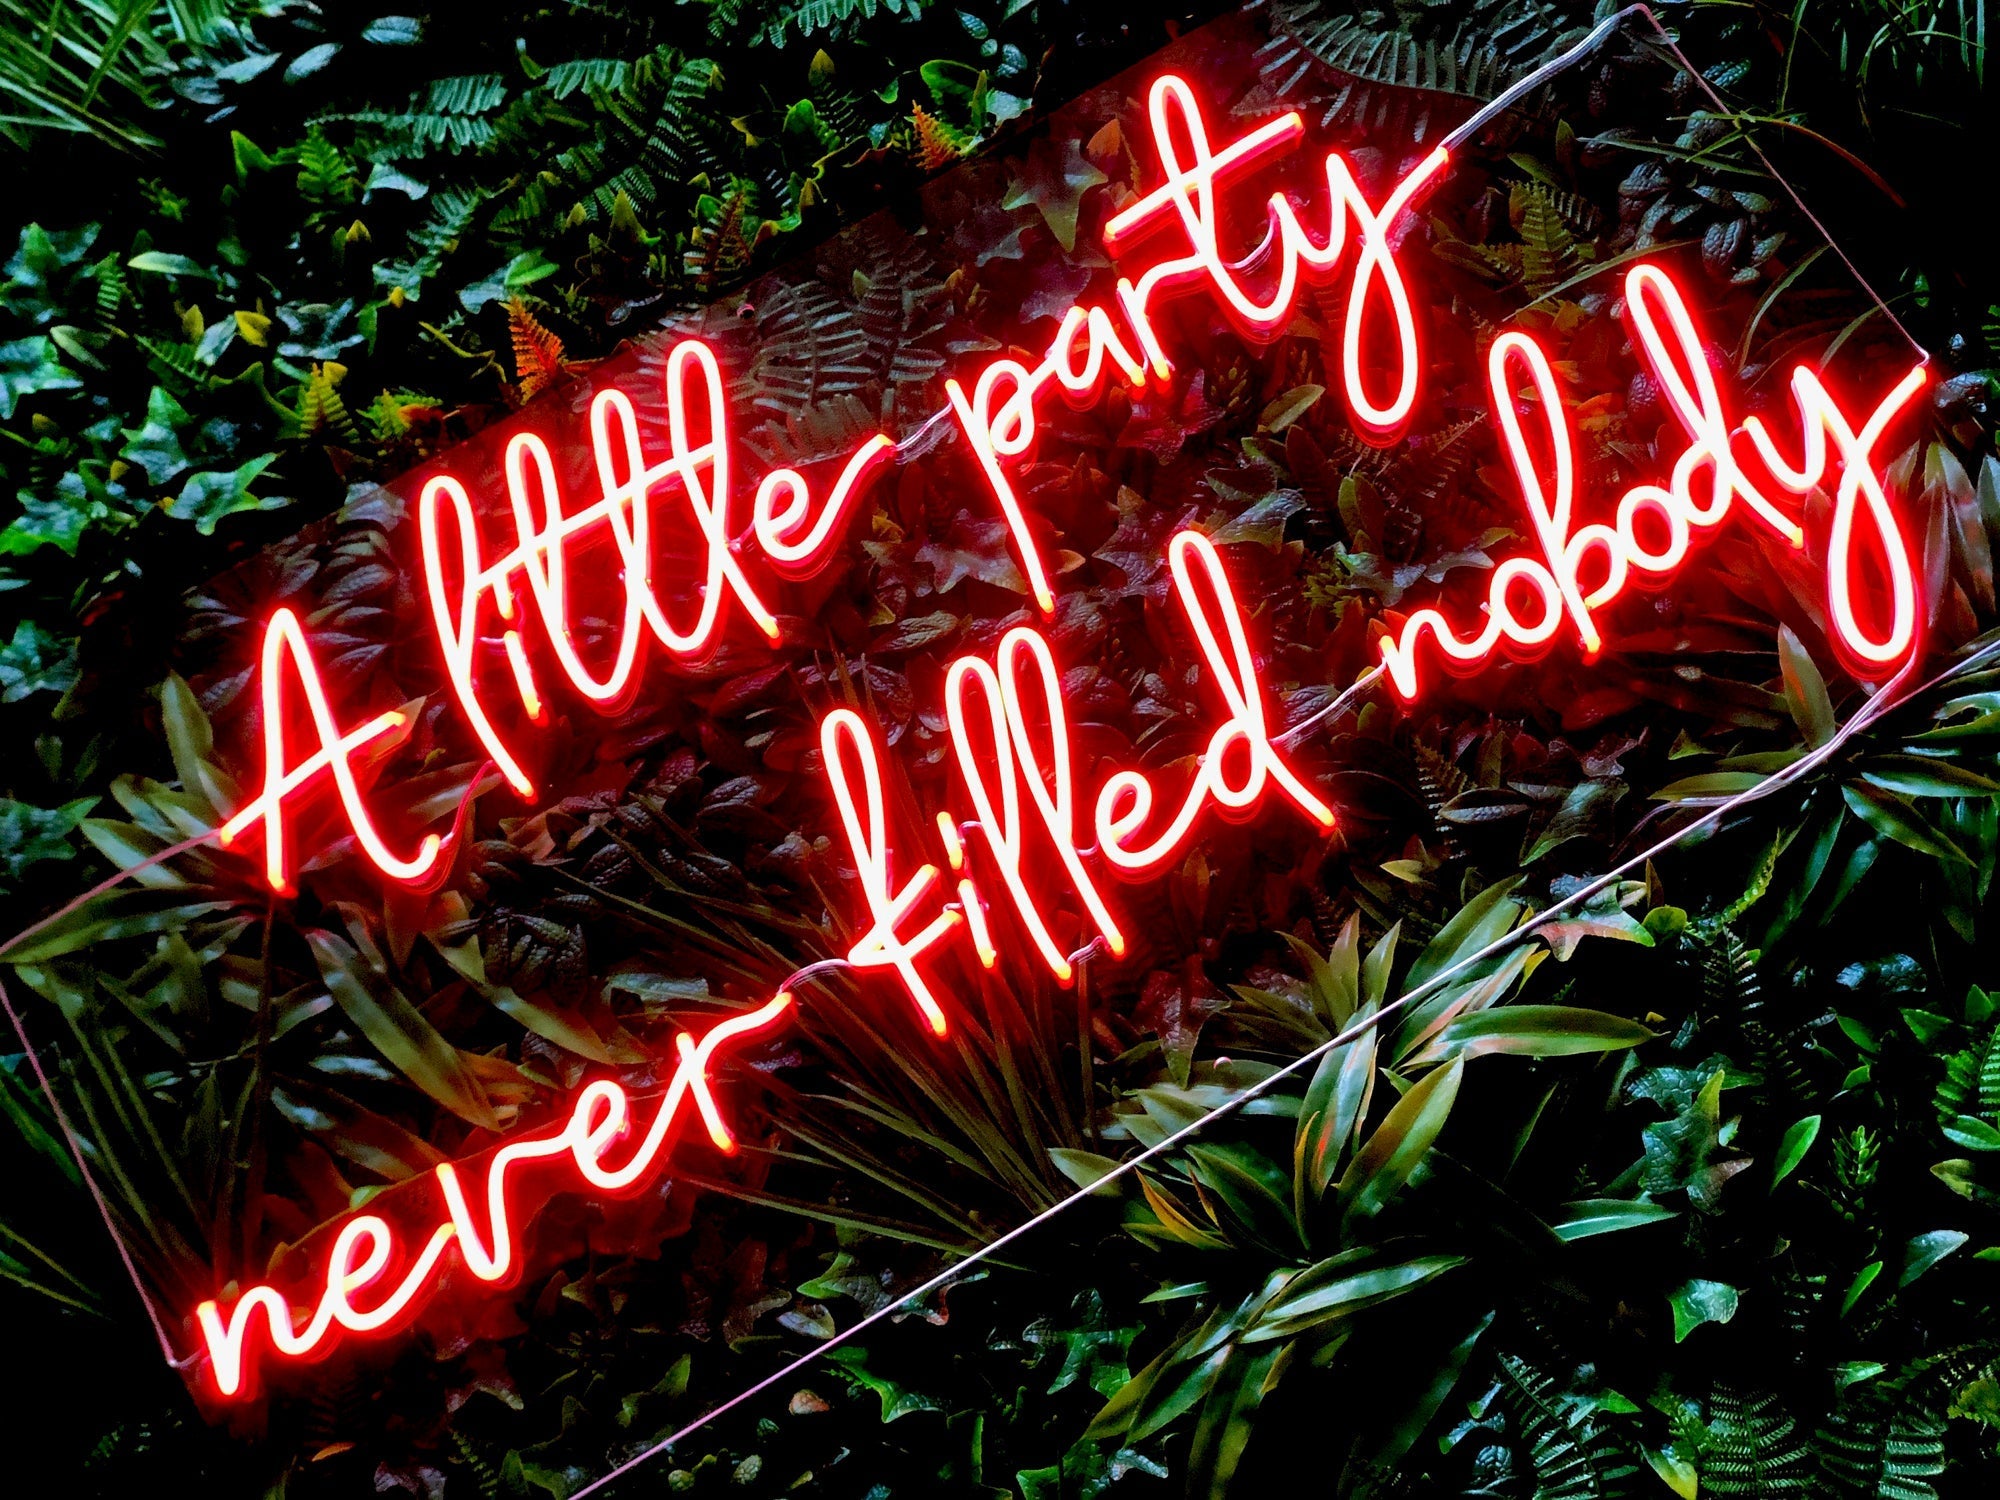 A little party never killed nobody, red neon sign for a wedding, party or event (EXCLUSIVE)